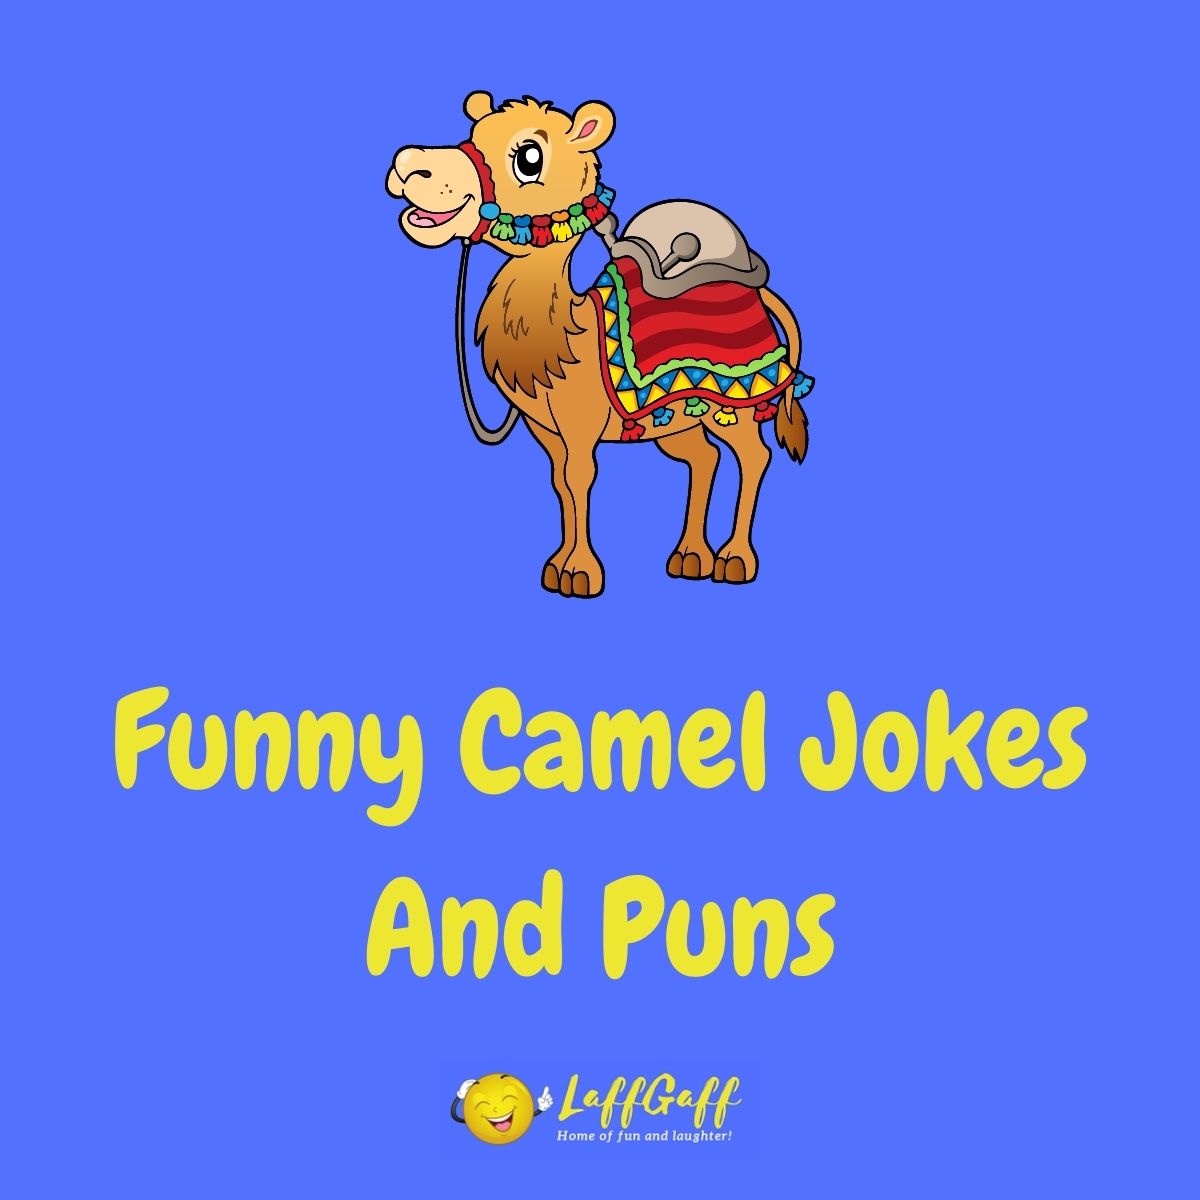 Featured image for a page of funny camel jokes and puns.